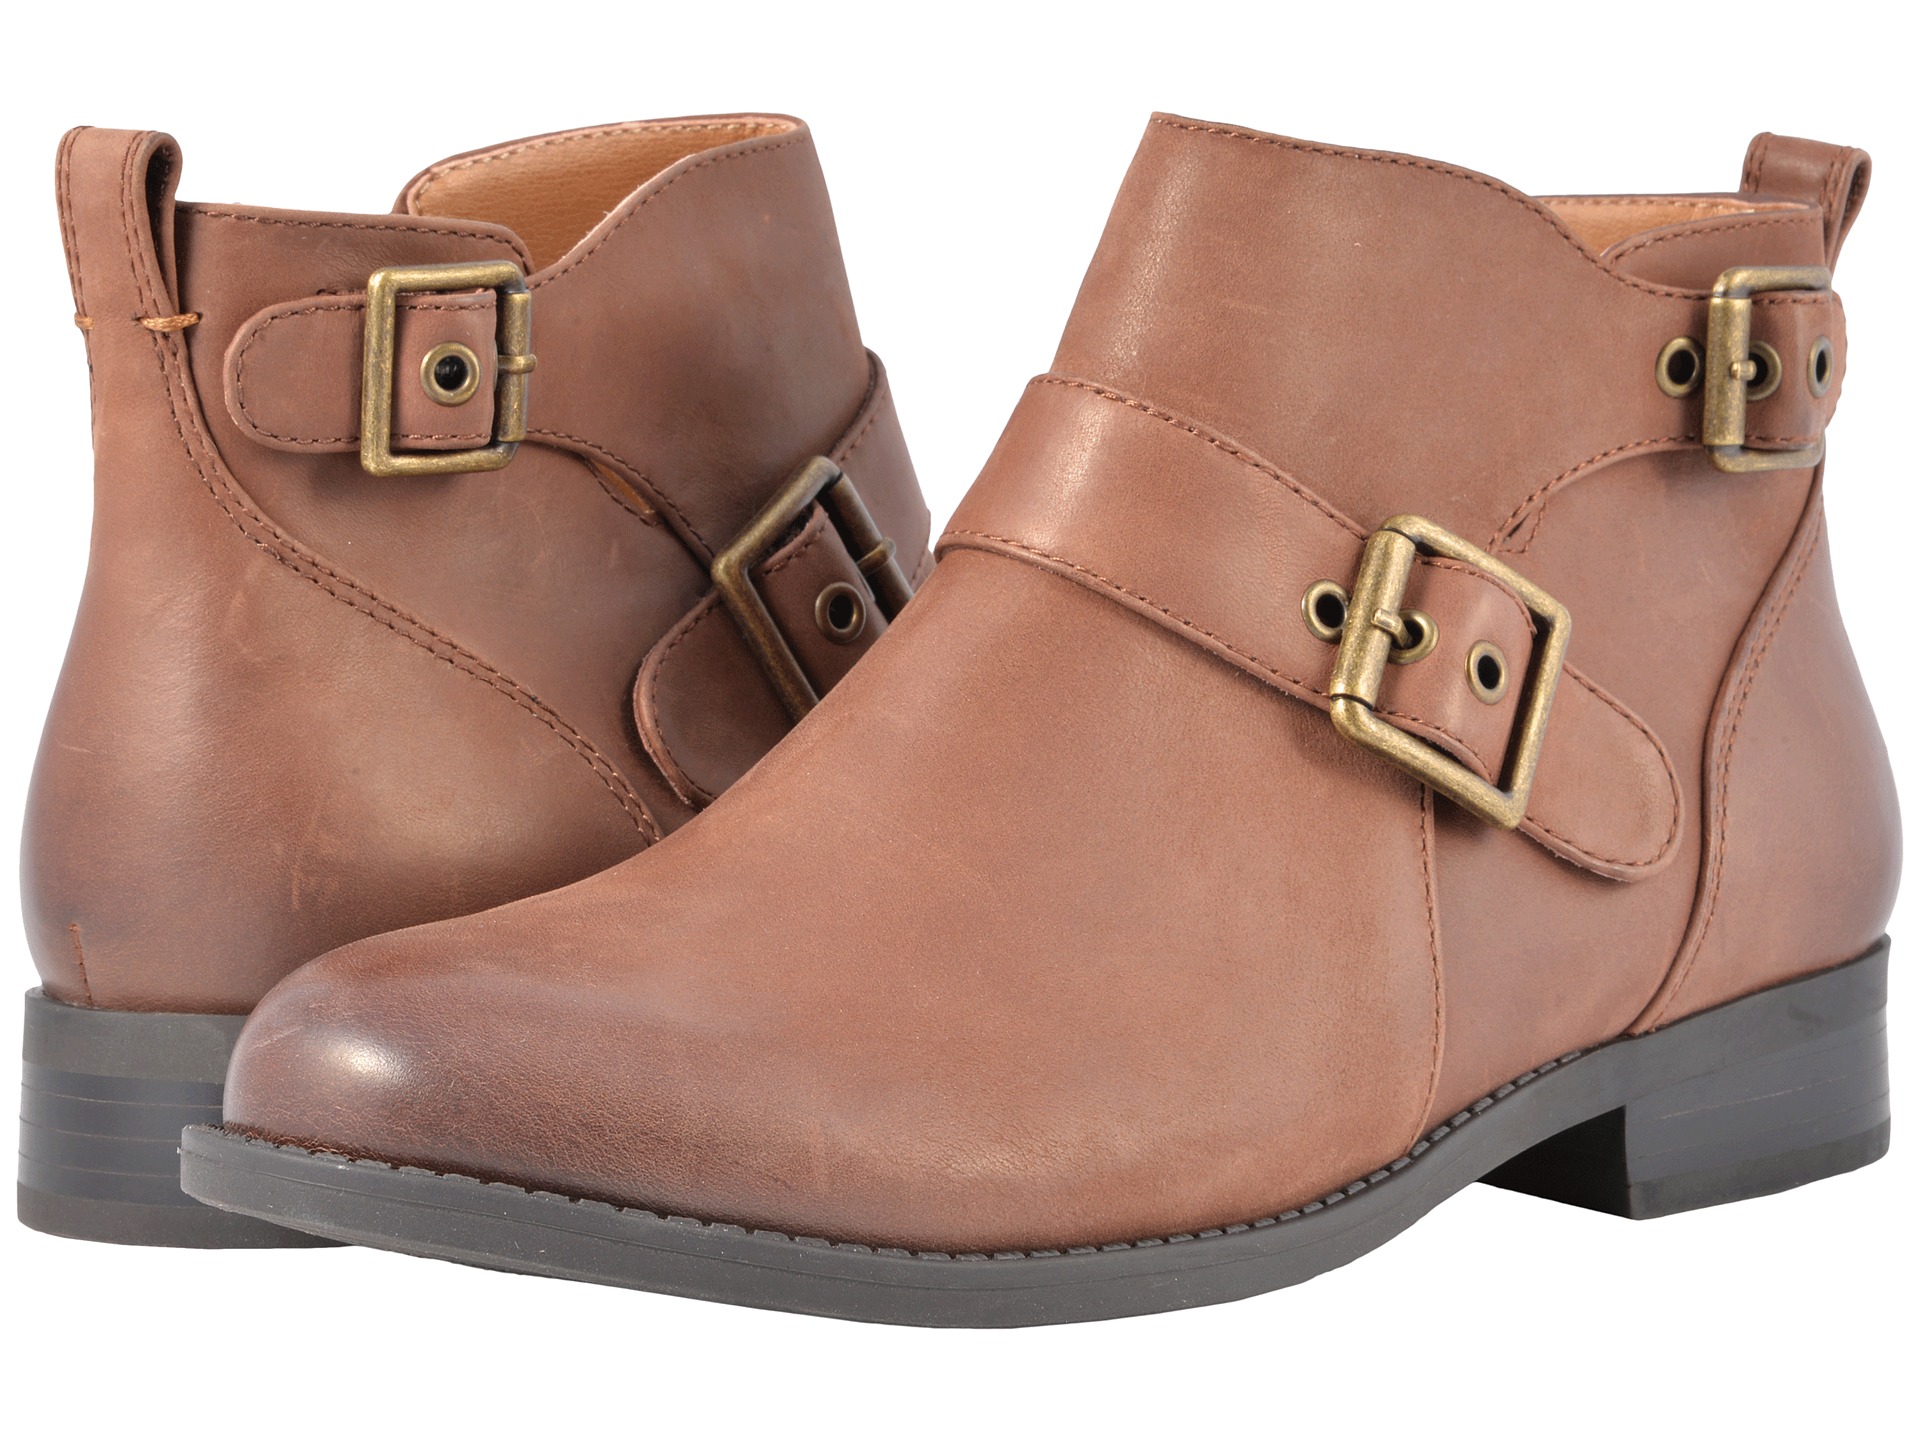 VIONIC Country Logan Ankle Boots at Zappos.com